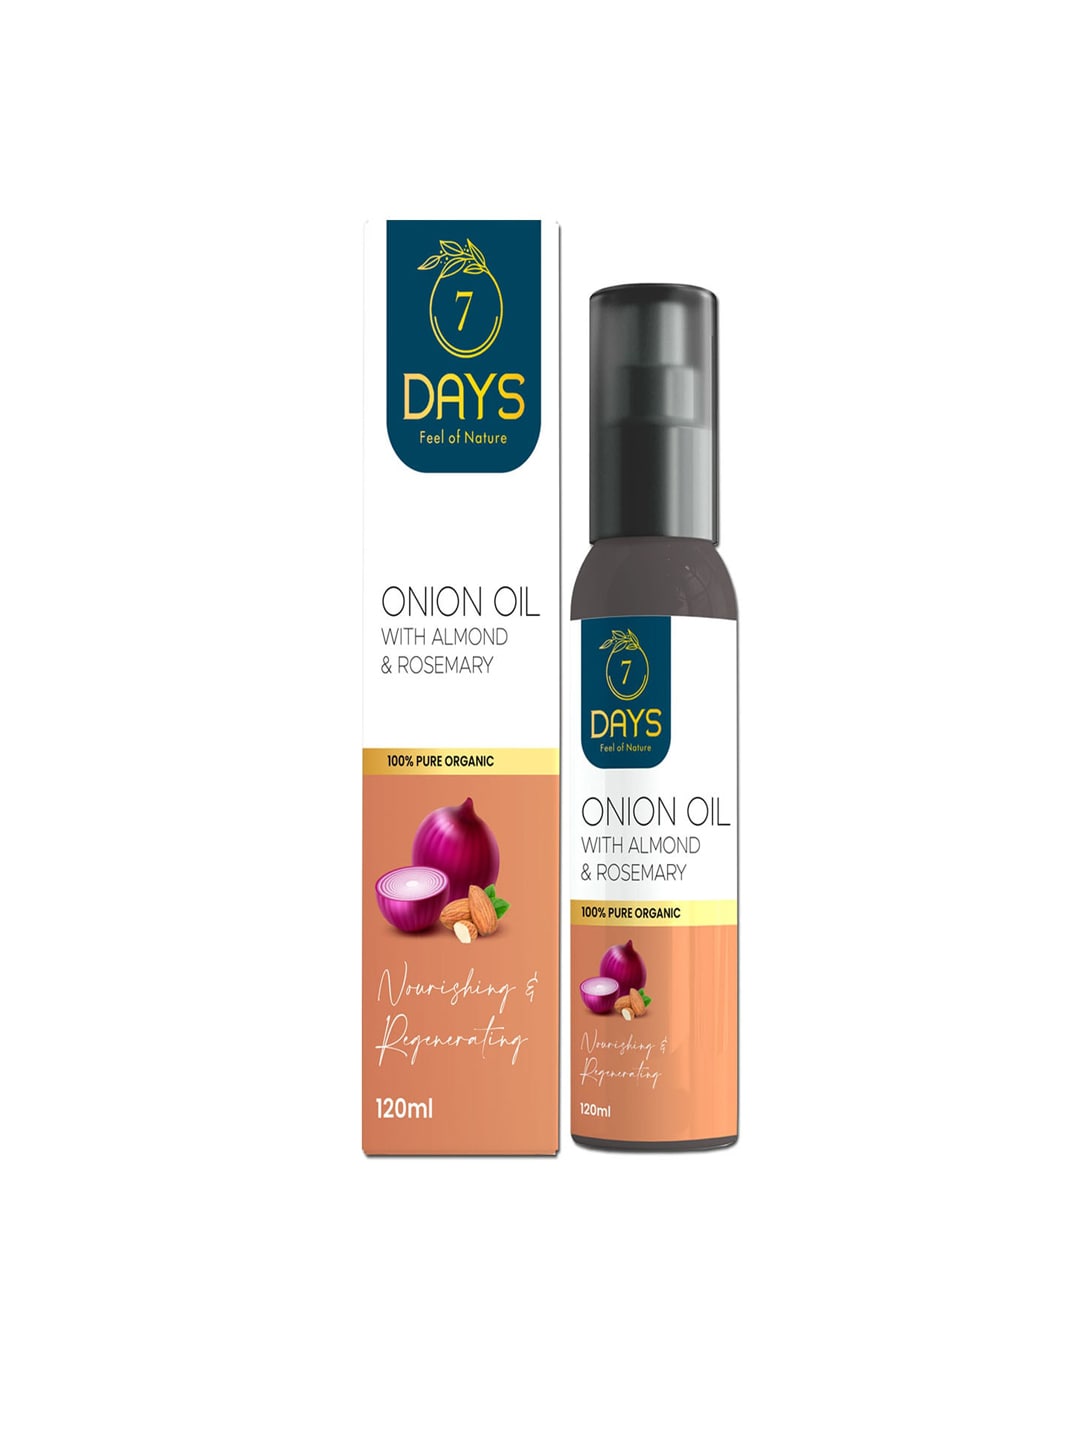 7 DAYS Nourishing & Regenerating Onion Hair Oil with Almond & Rosemary - 120ml Price in India